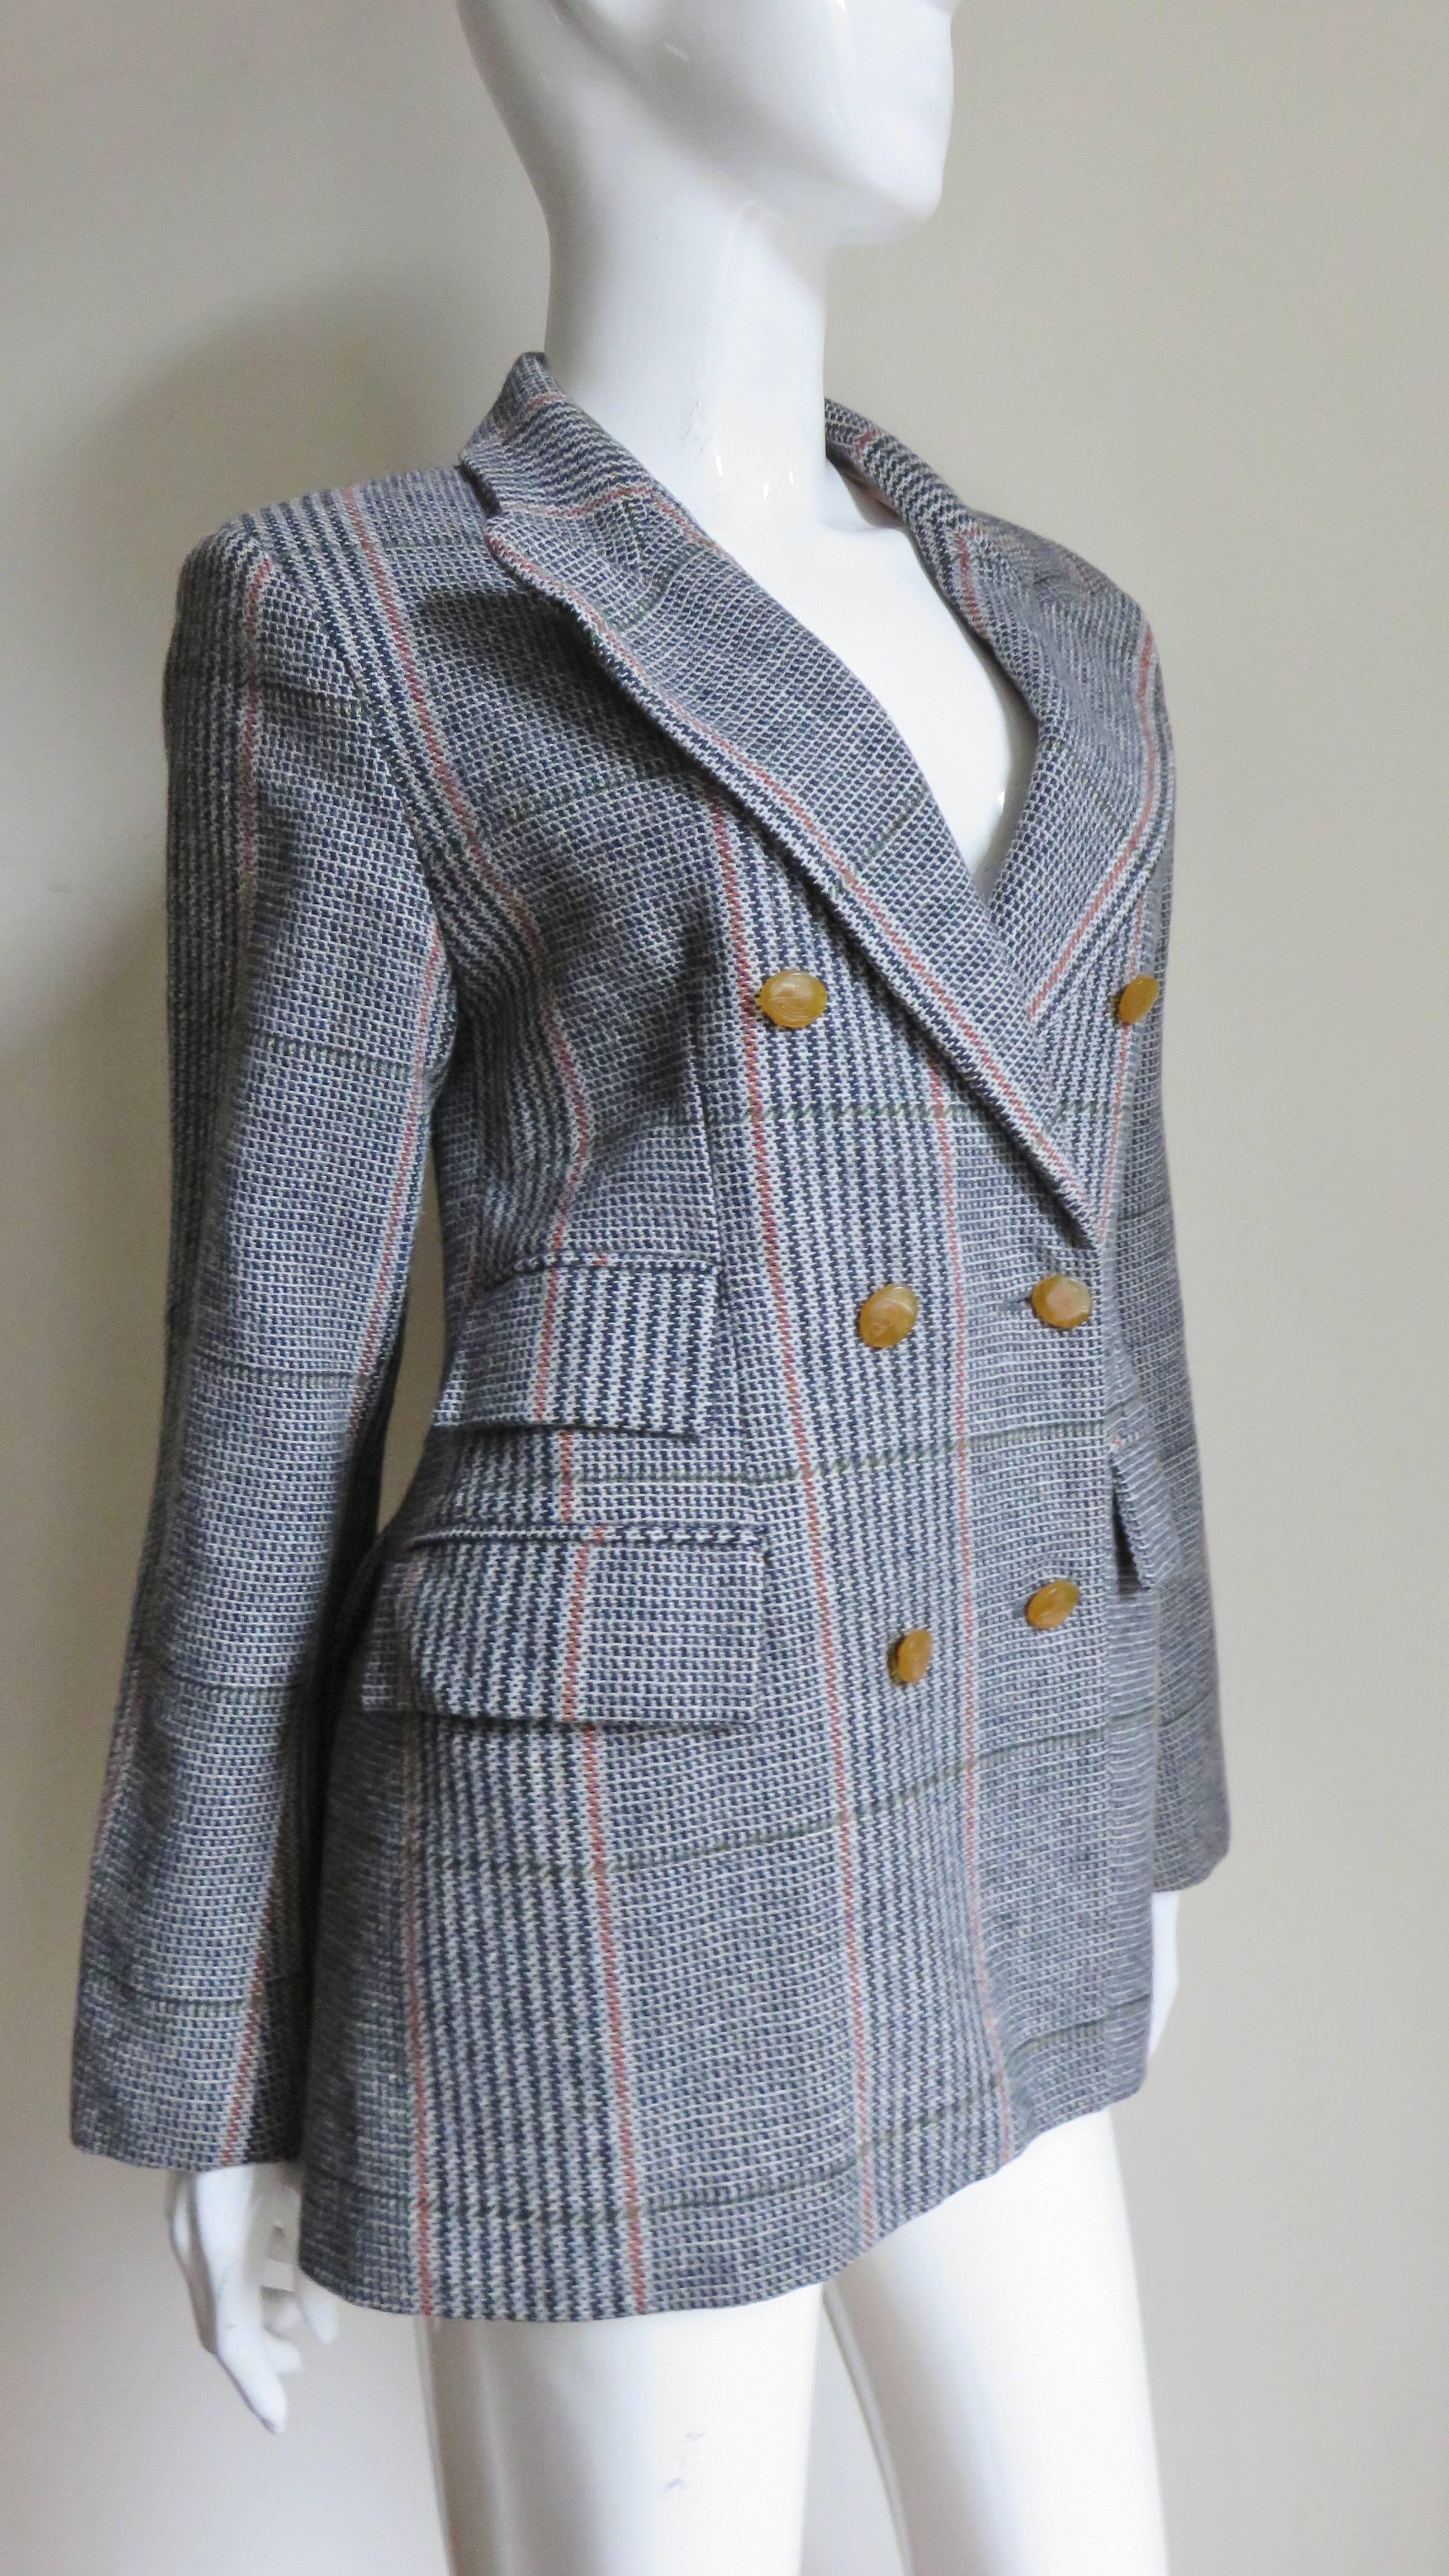  Vivienne Westwood Plaid Jacket 1990s In Good Condition For Sale In Water Mill, NY